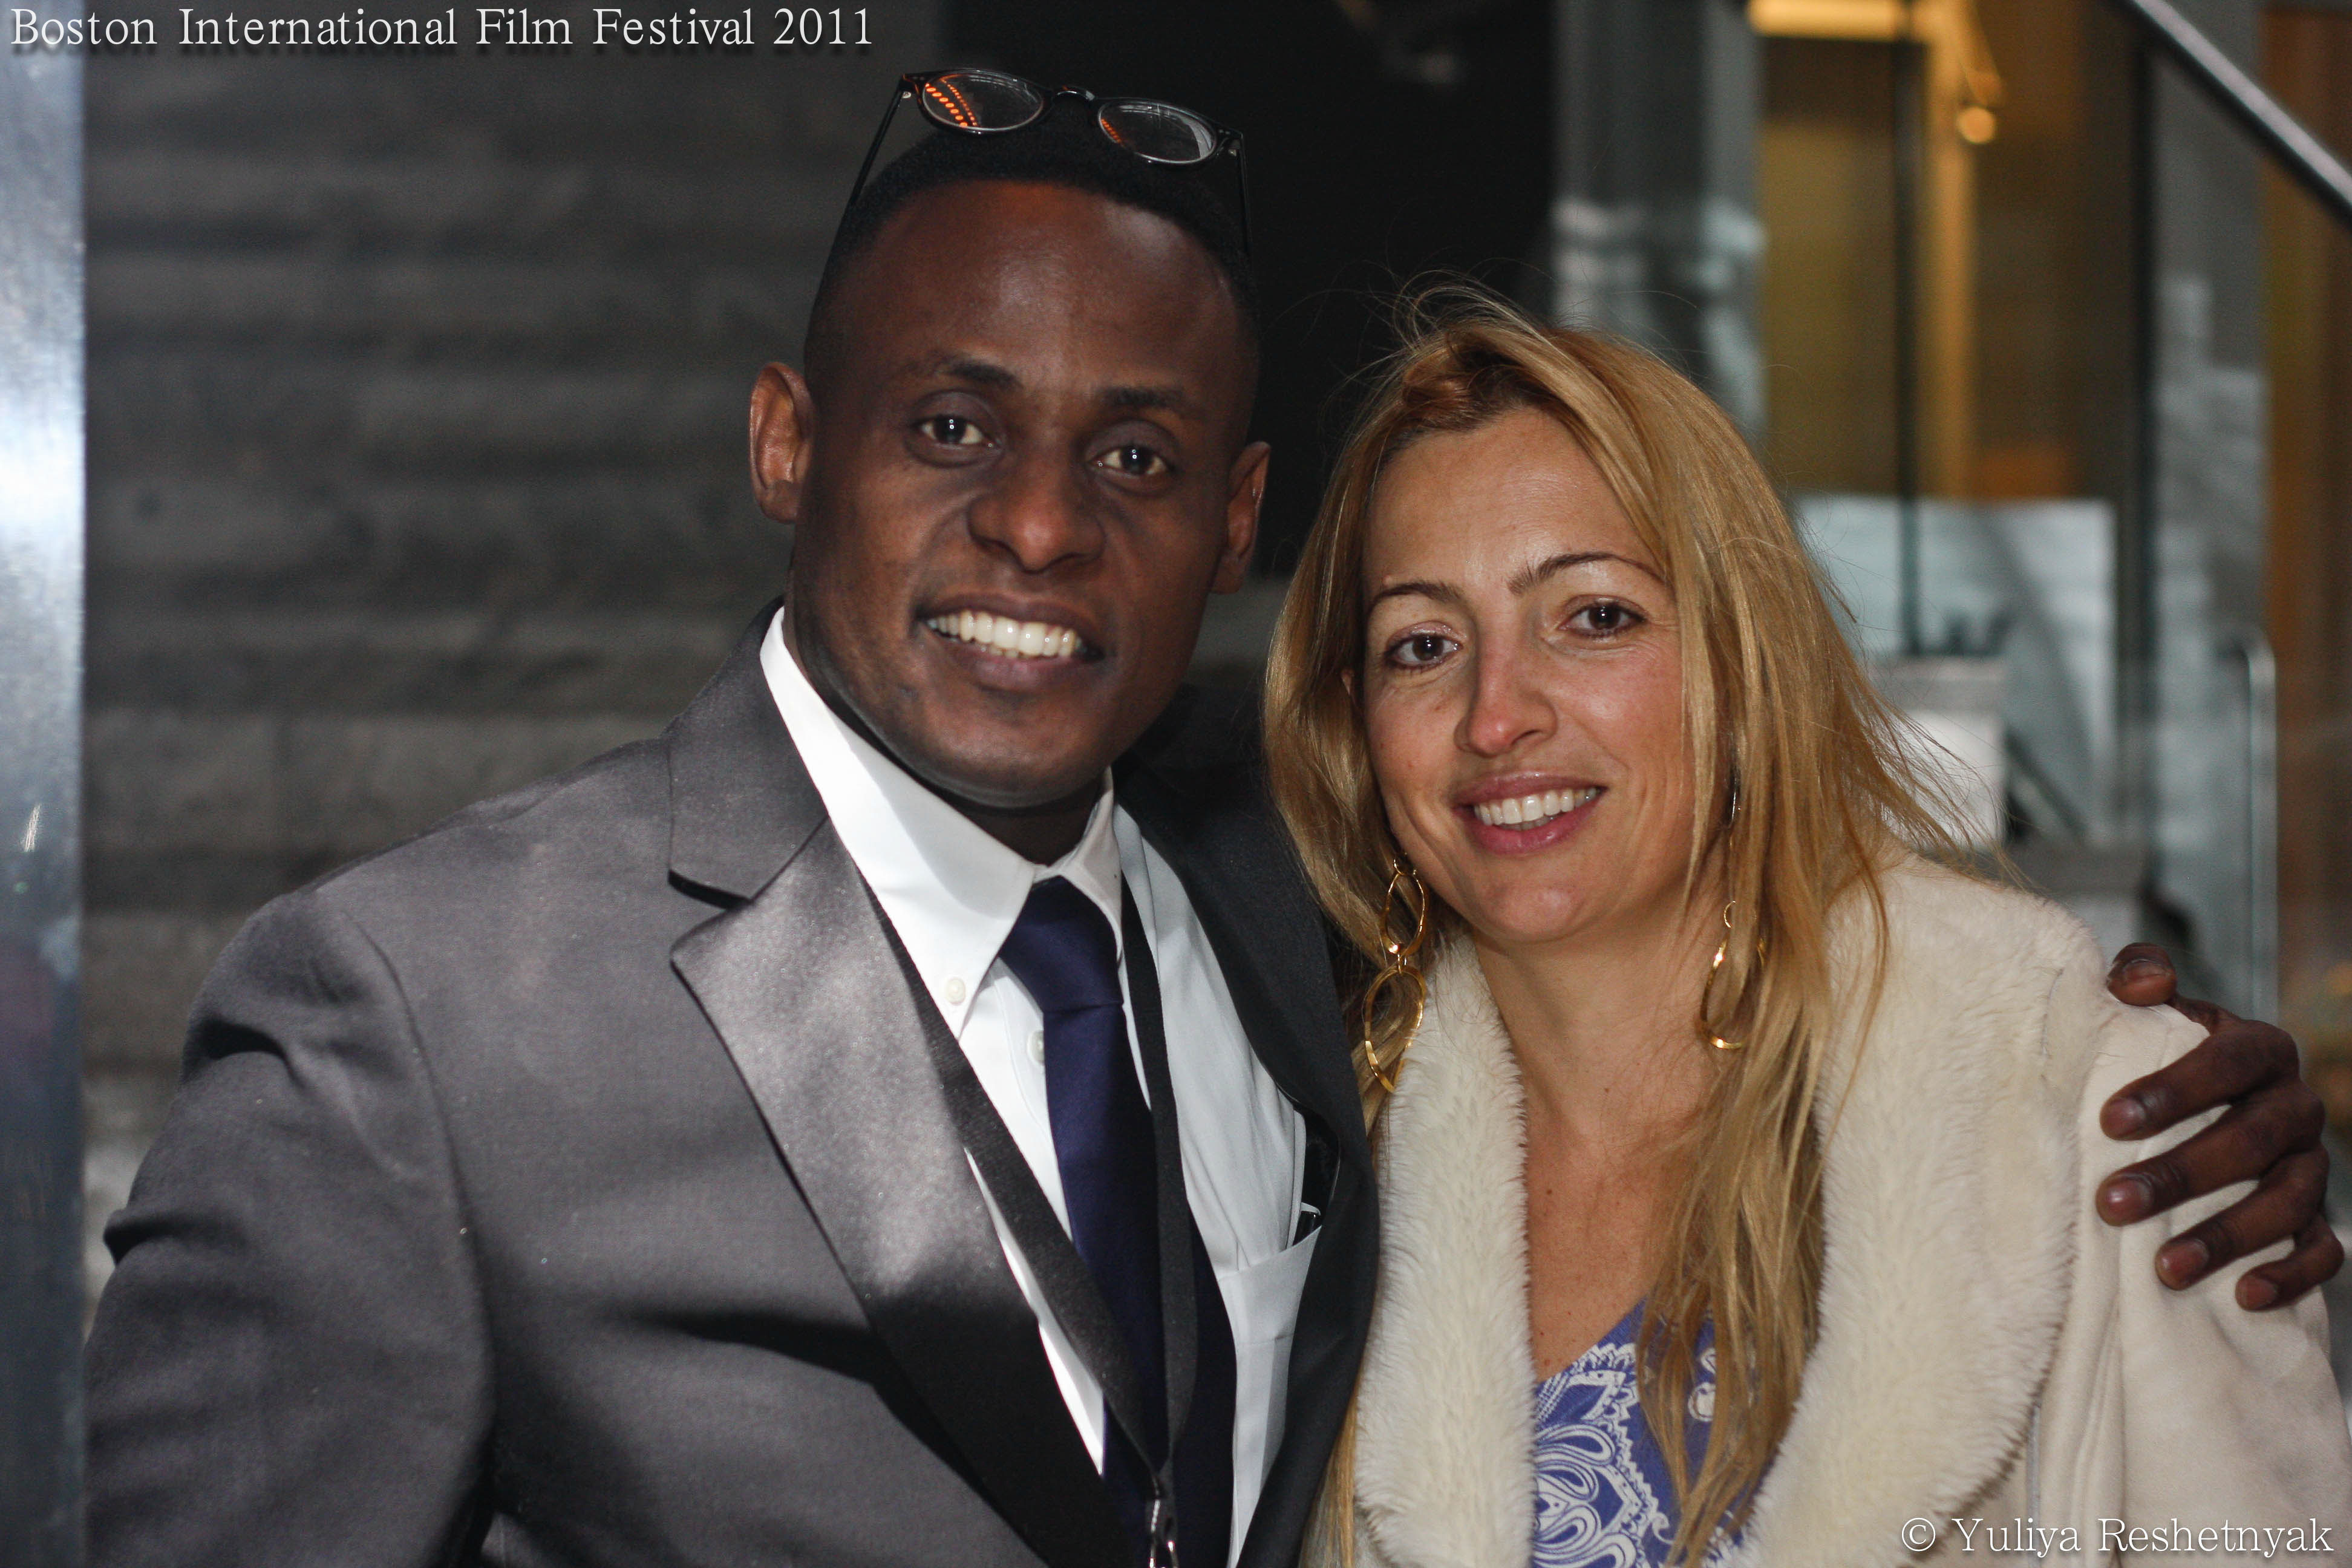 Patrick Jerome and Elika Portnoy at BIFF 2012 Opening Night Red Carpet Affaire